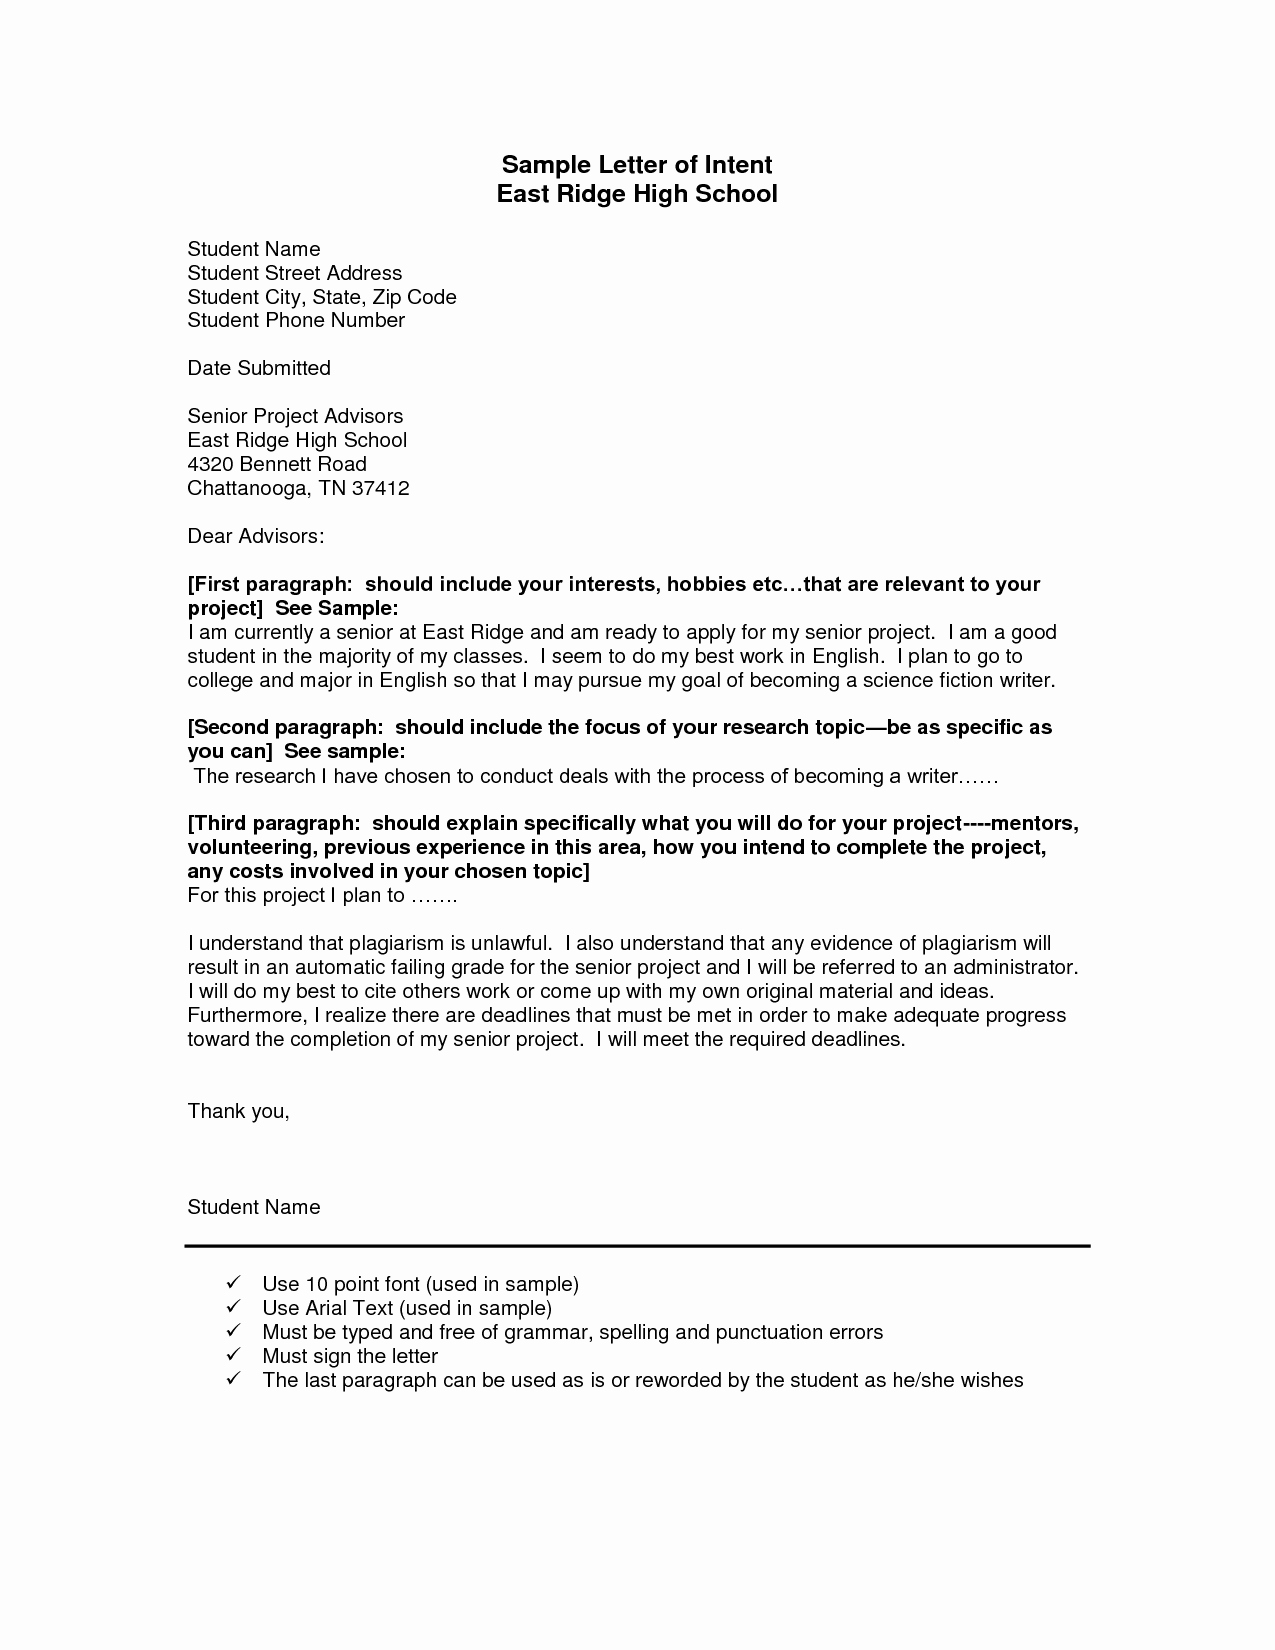 Samples Of Letter Of Intent Luxury Business Letter Intent Sample